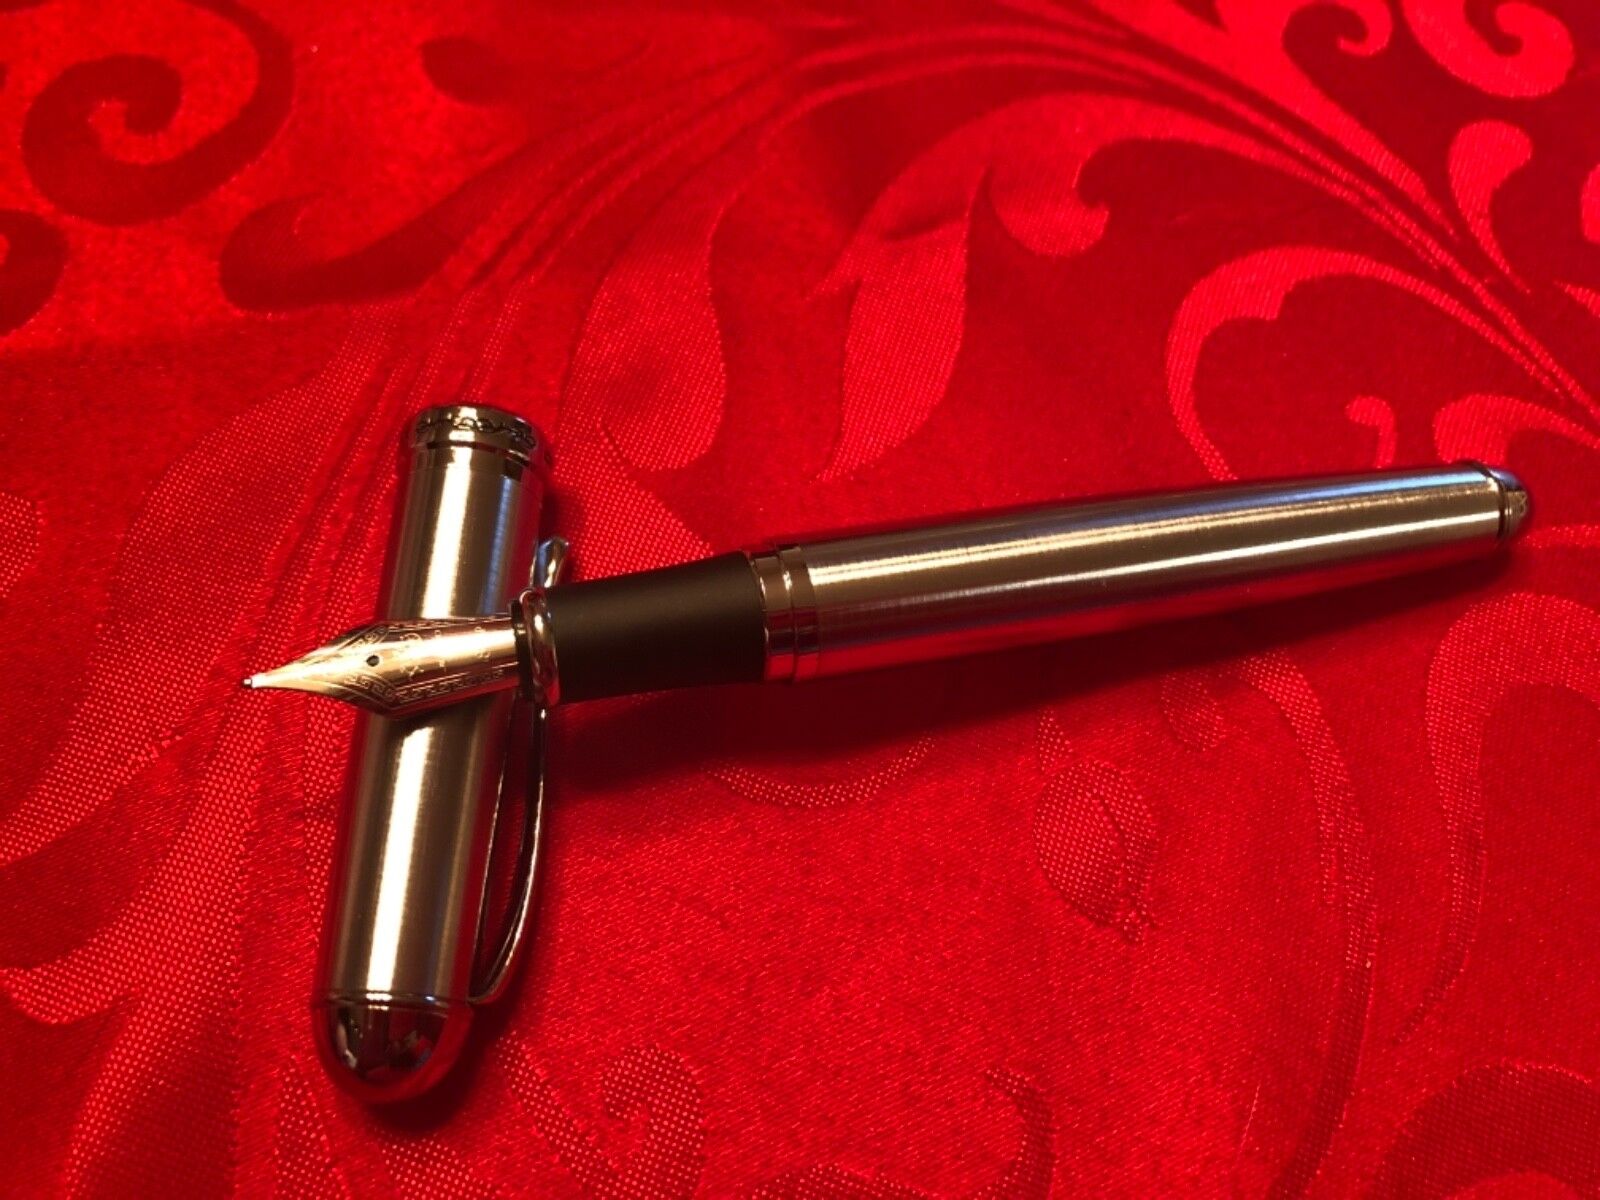 Stainless steal fountain pen GP nib New OBO